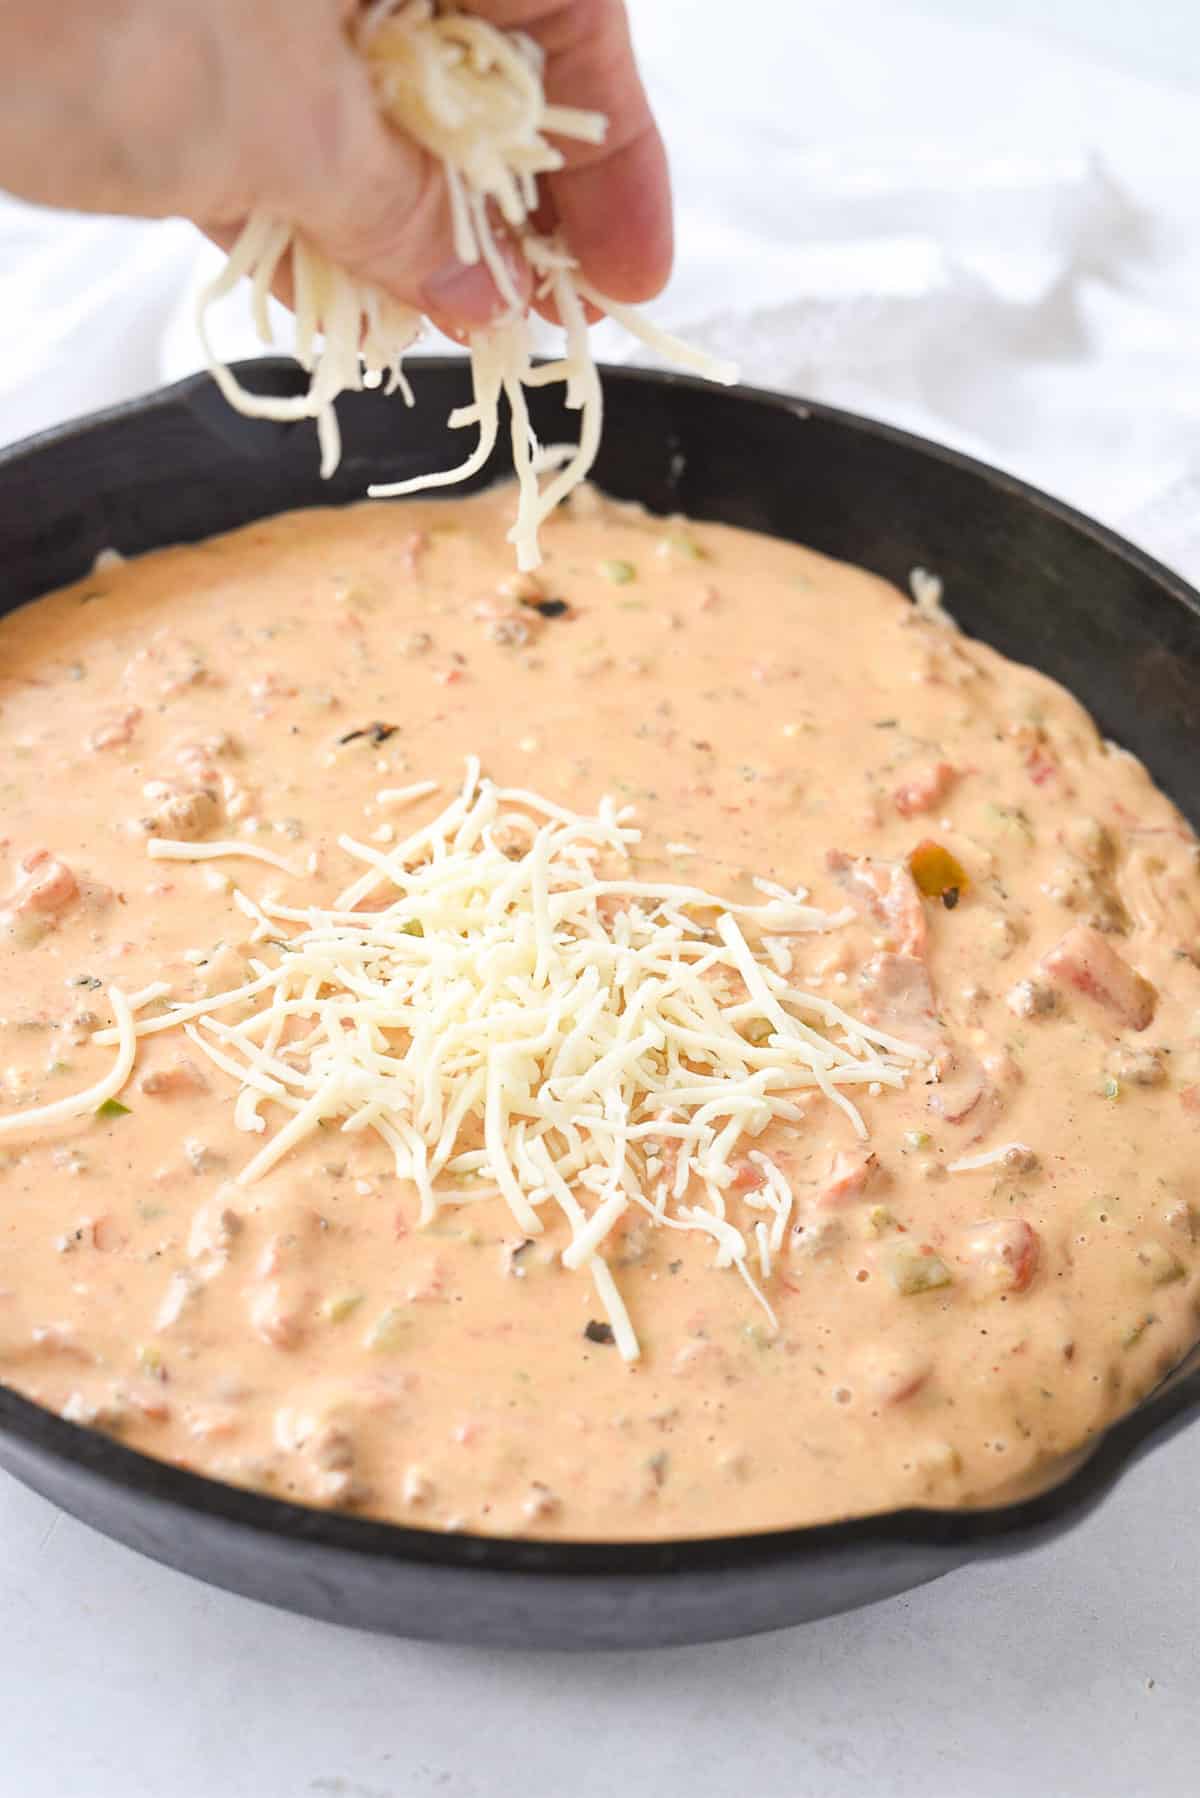 sprinkling cheese on top of queso dip